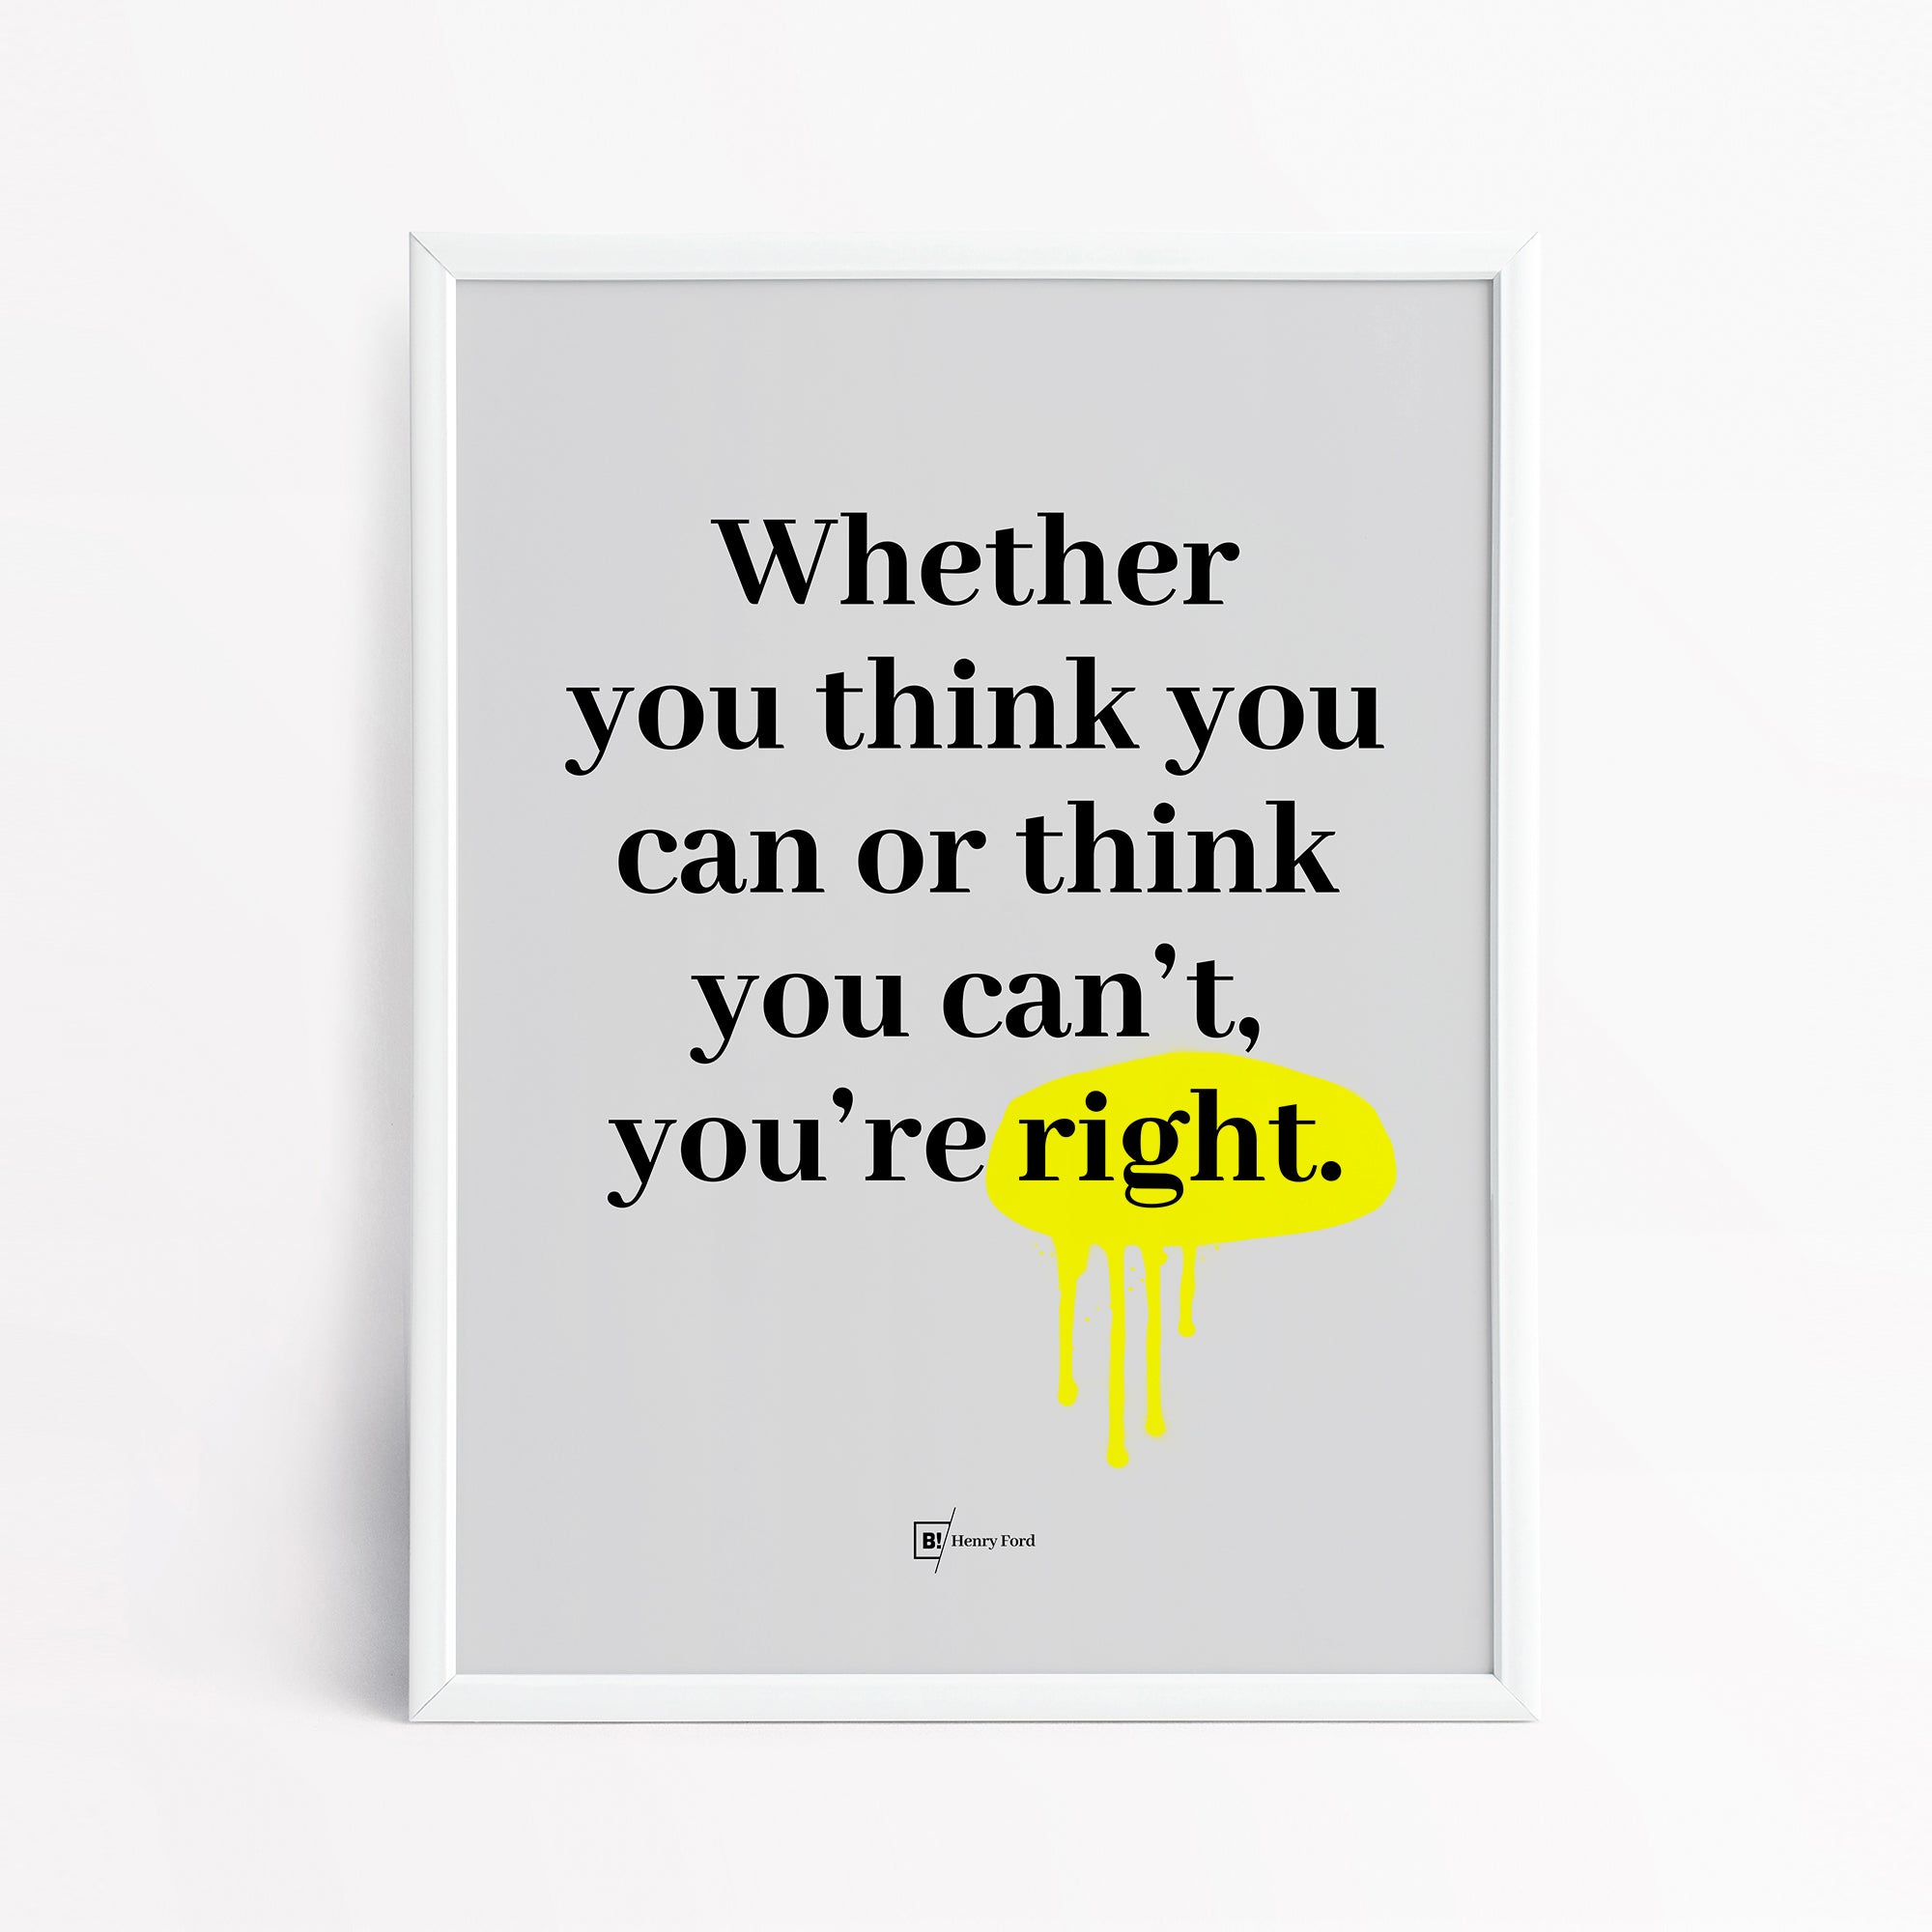 Be inspired by Henry Ford's famous "Whether you think you can or think you can't, you're right" quote art print. This artwork was printed using the giclée process on archival acid-free paper and is presented in a simple white frame that captures its timeless beauty in every detail.